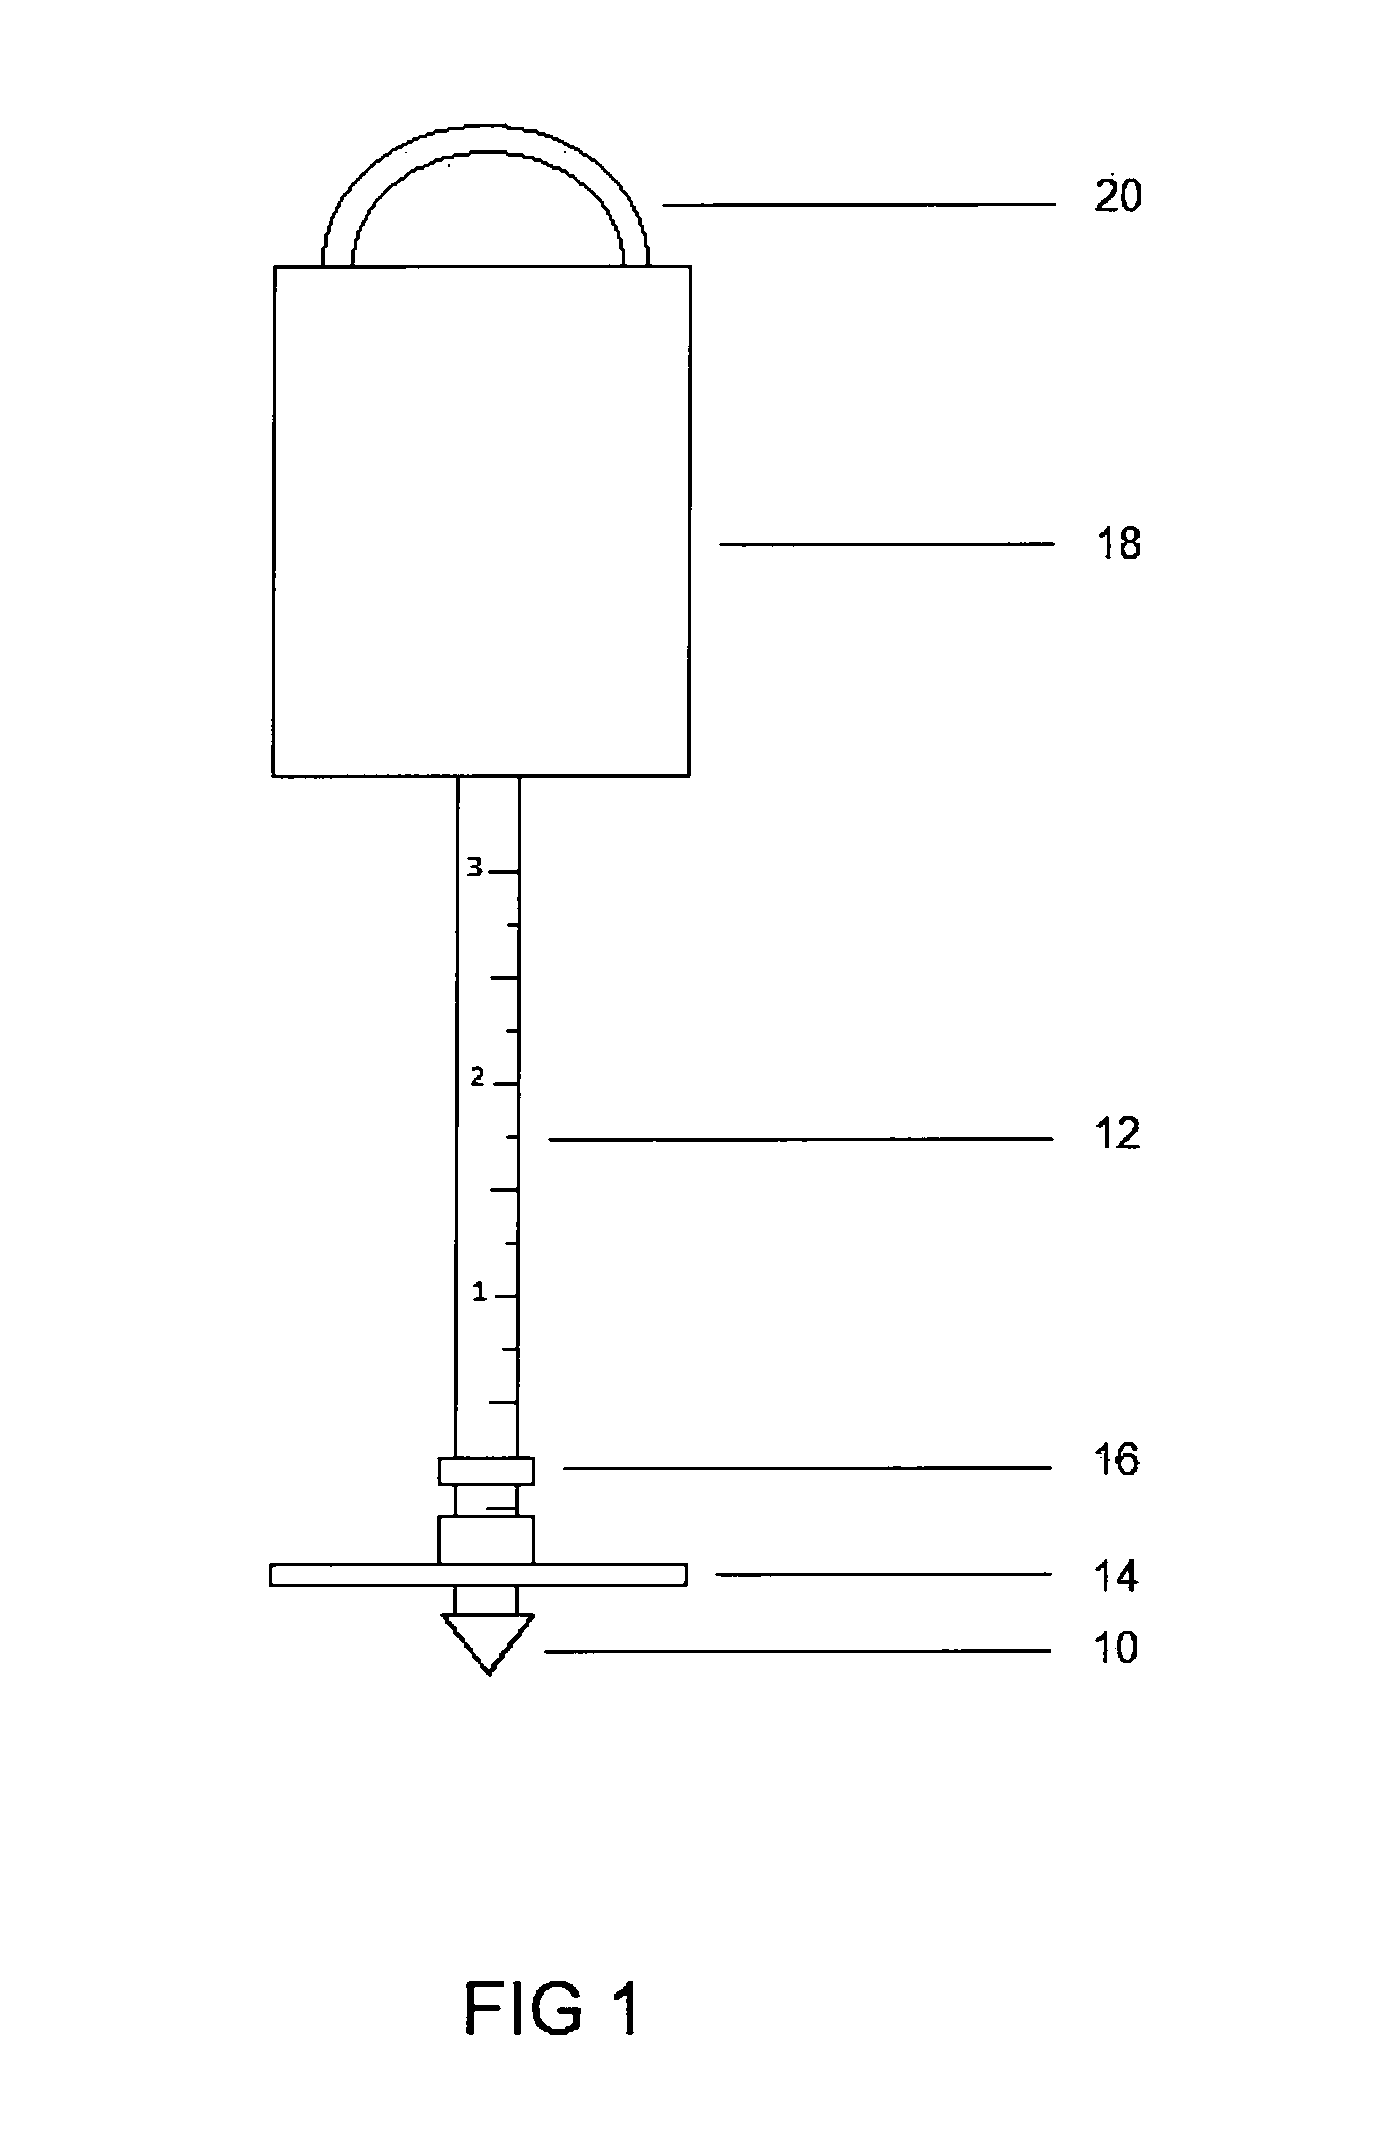 Shaft sounding device for measuring thickness of sediments at base of drilled shafts